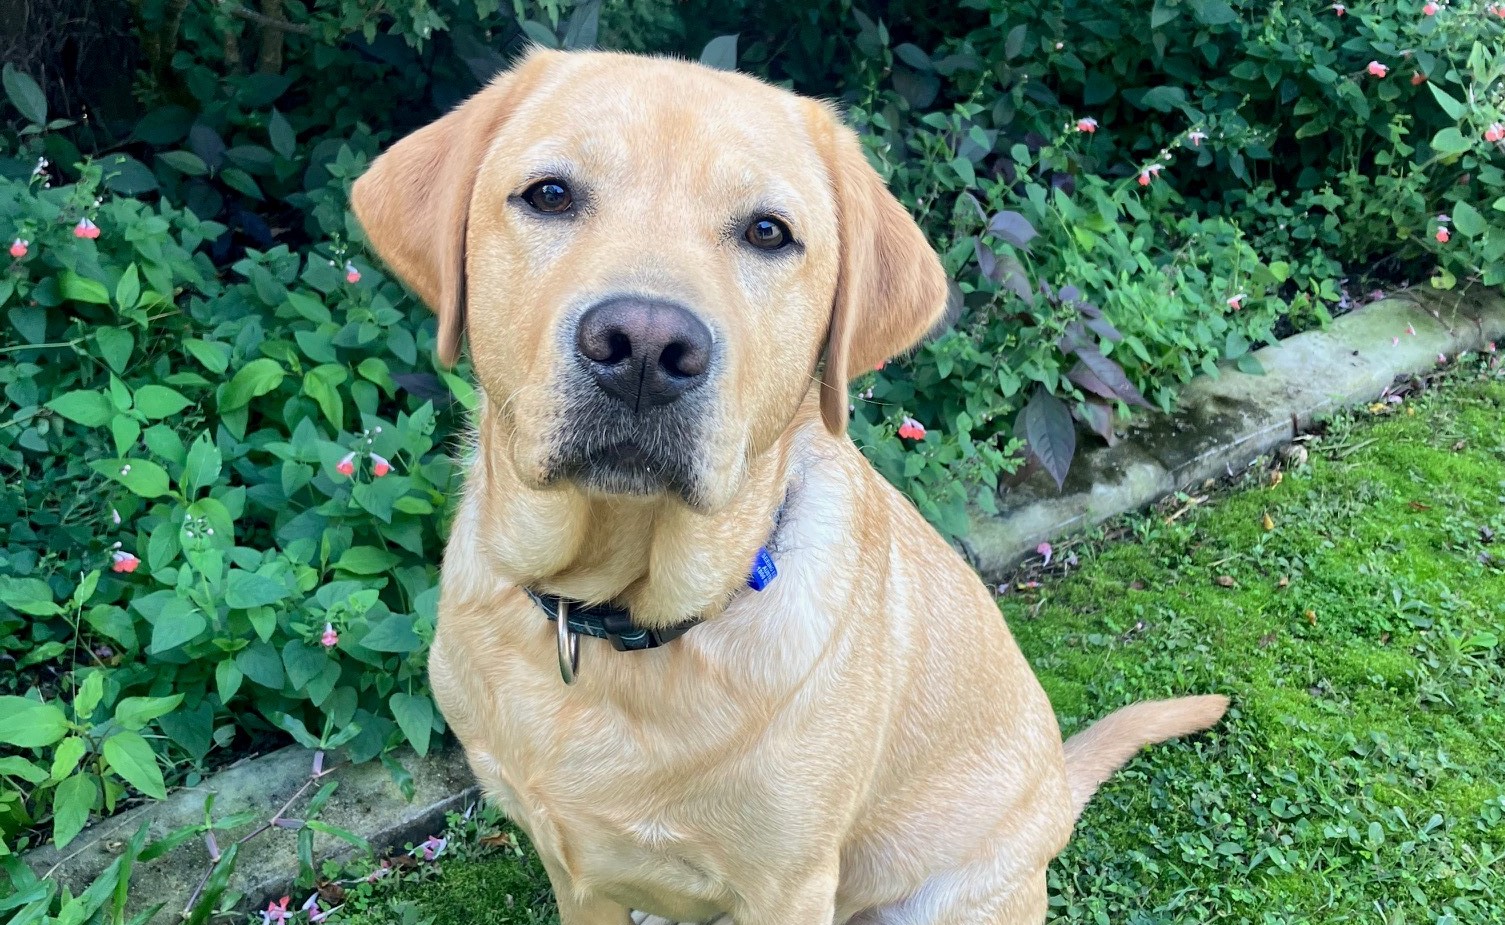 A golden labrador sits calmy on the grass in front of a garden bed.